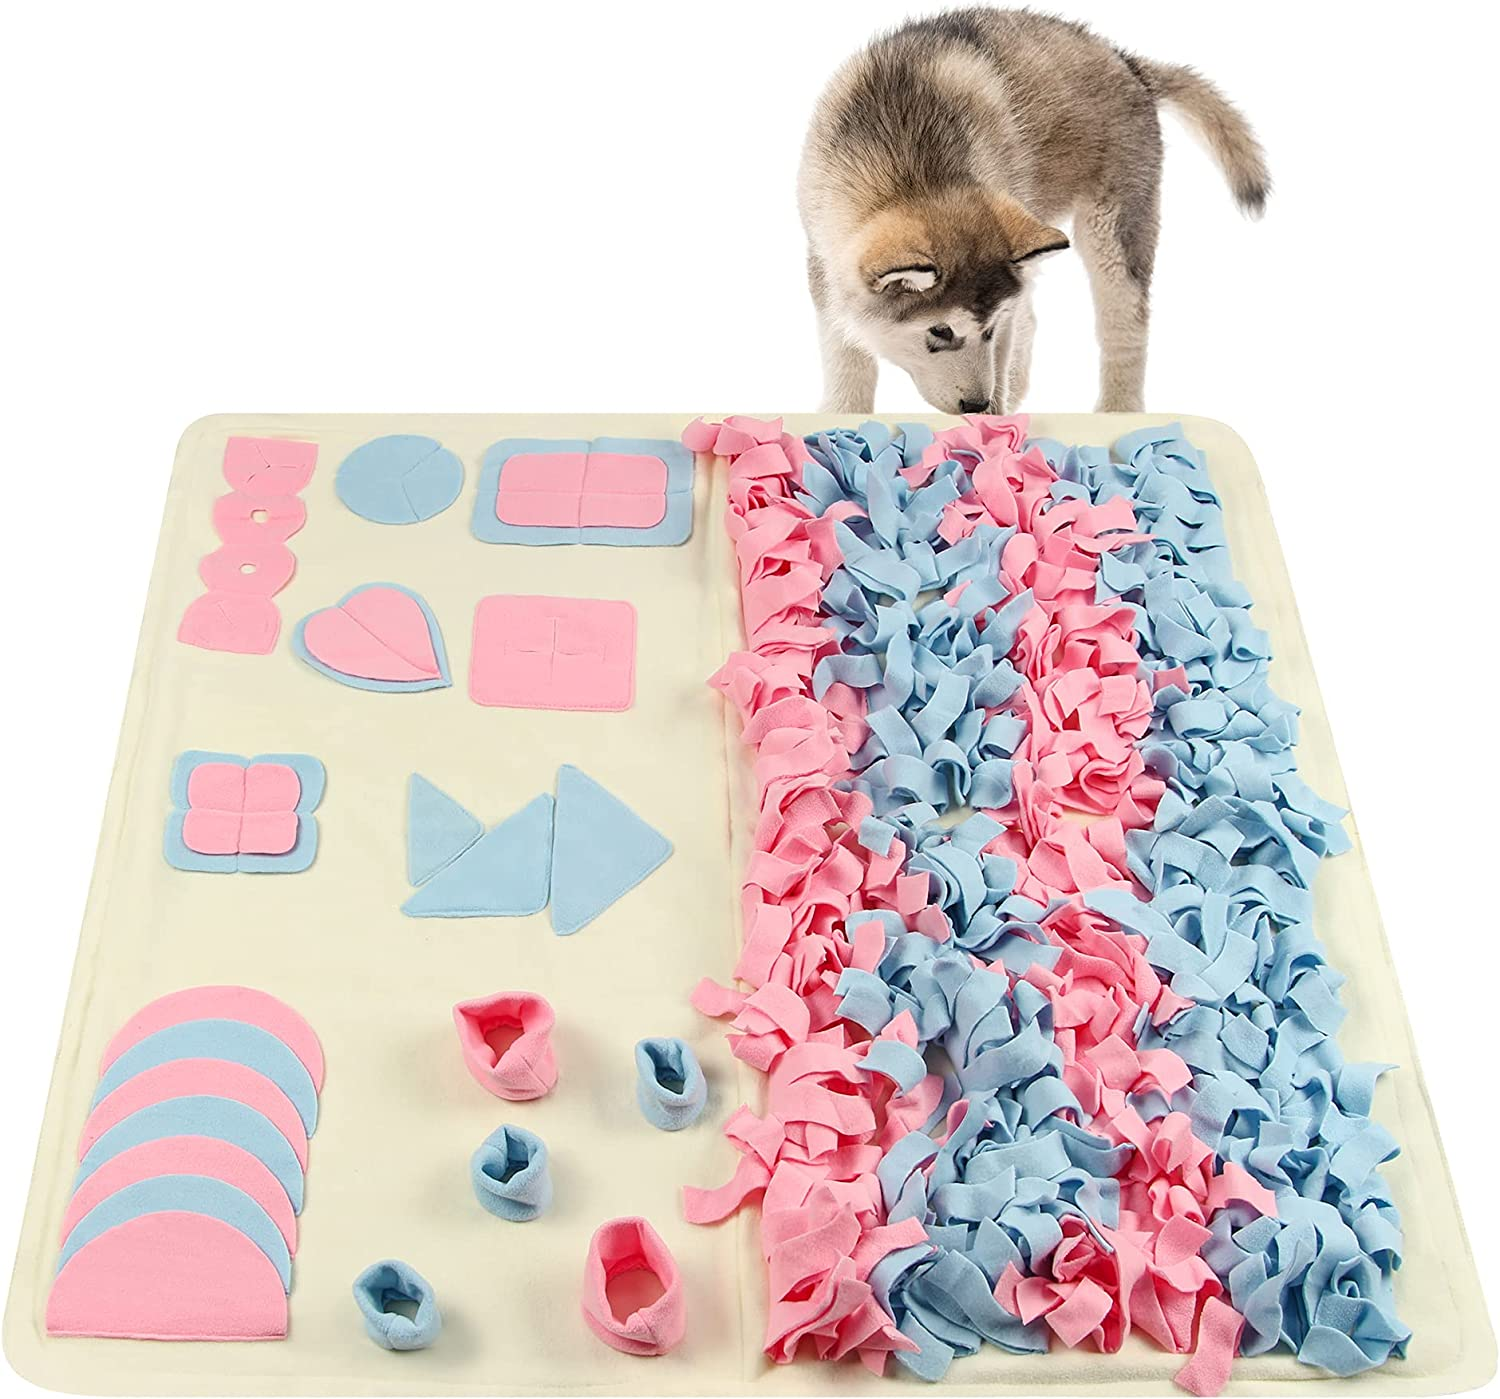 STELLAIRE CHERN Snuffle Mat for Small Large Dogs Nosework Feeding Mat  (23.6 x 39.4) Easy to Fill and Machine Washable Training Mats Pet